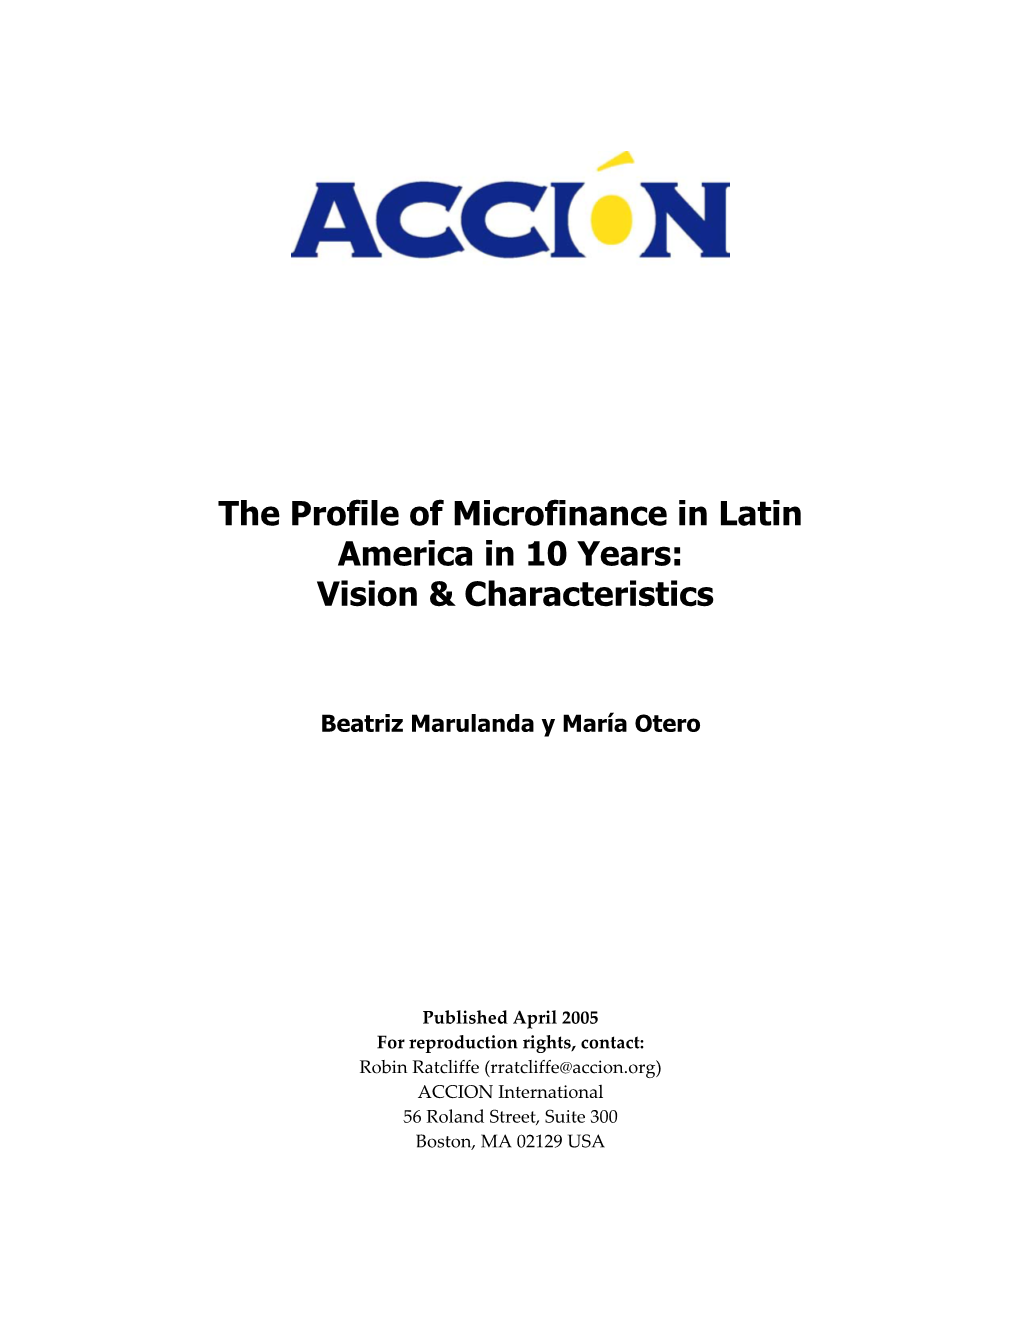 The Profile of Microfinance in Latin America in 10 Years: Vision & Characteristics